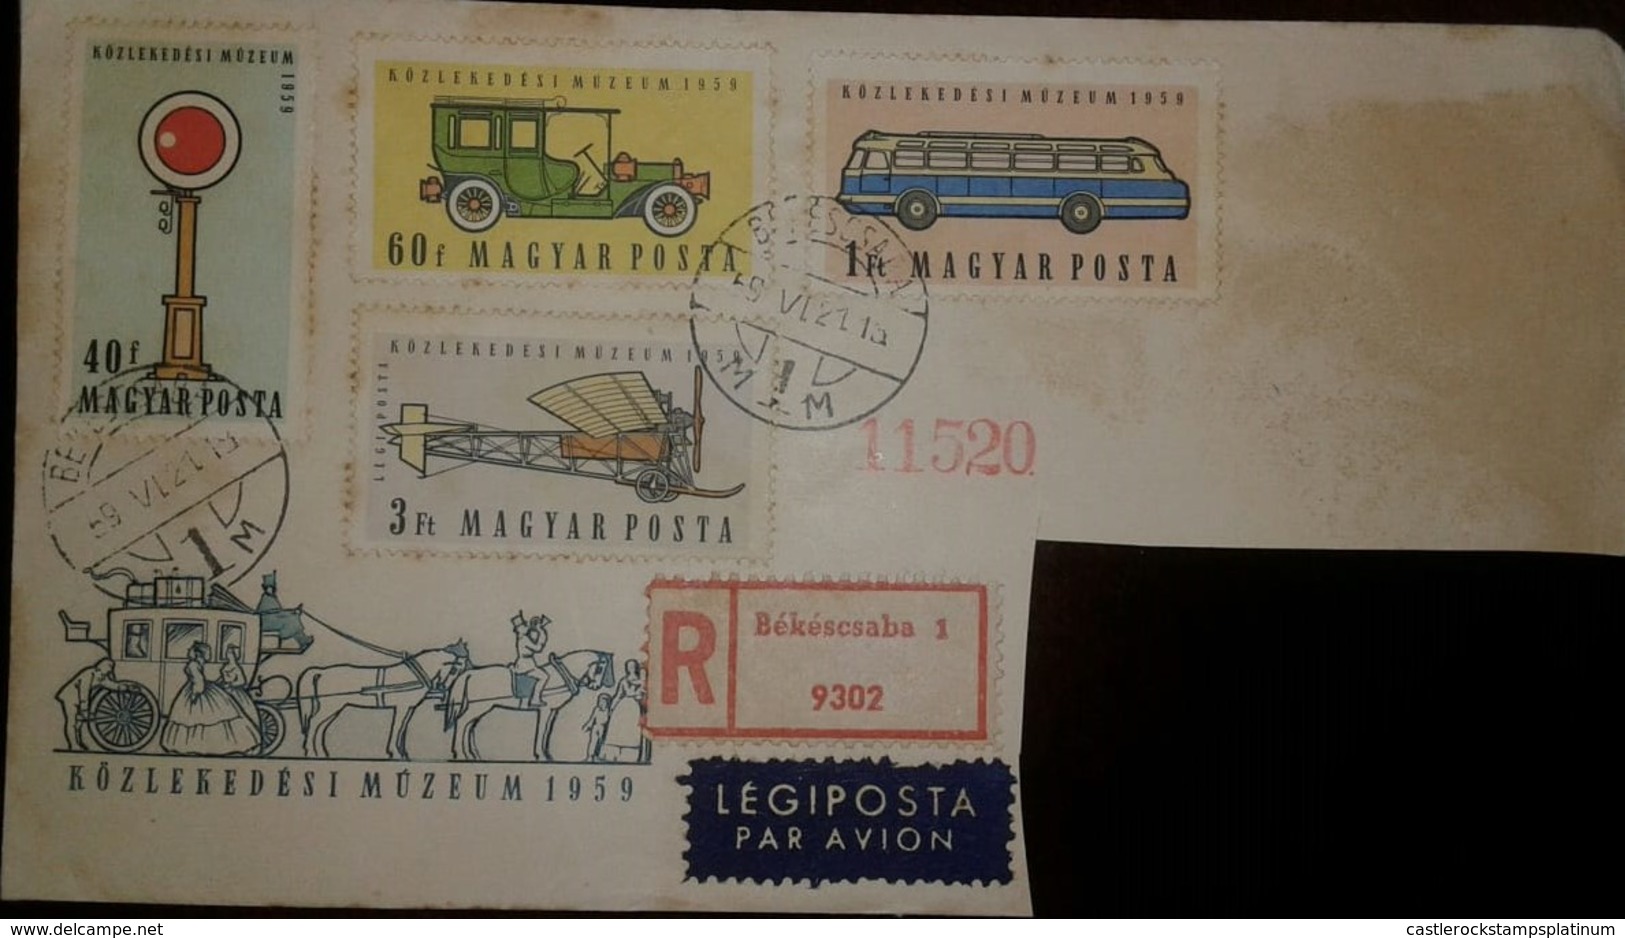 O) 1959 HUNGARY, TRANSPORT MUSEUM BUDAPEST -LOCOMOTIVE-SEMAPHORE-AUTOMOBILE, ICARUS BUS-PLANE,AIRPLANE, REGISTERED FROM - Covers & Documents